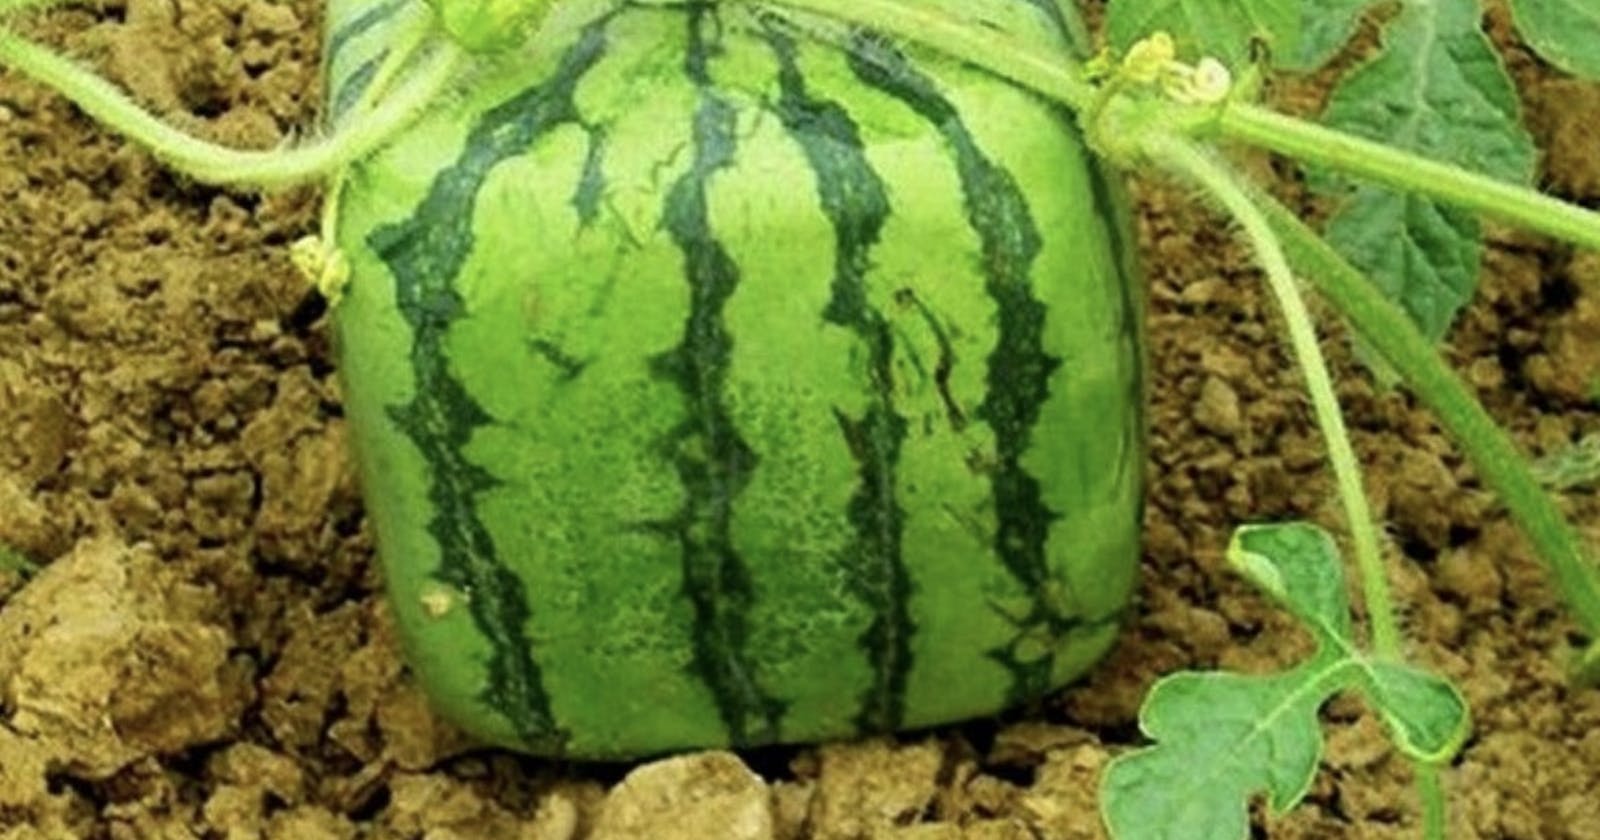 Efficiency, Beauty and Symmetry- Square watermelons in Japan.